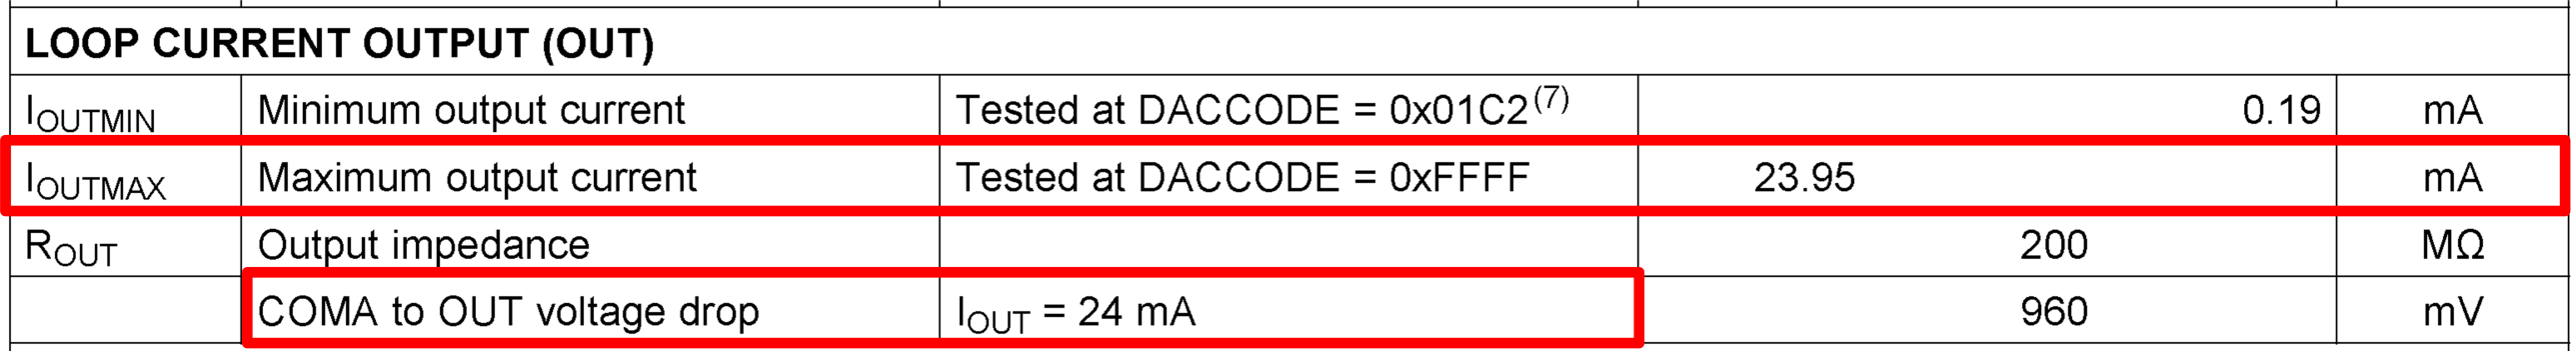 DAC161S997 specification_for_loop_current_output_snas621.png